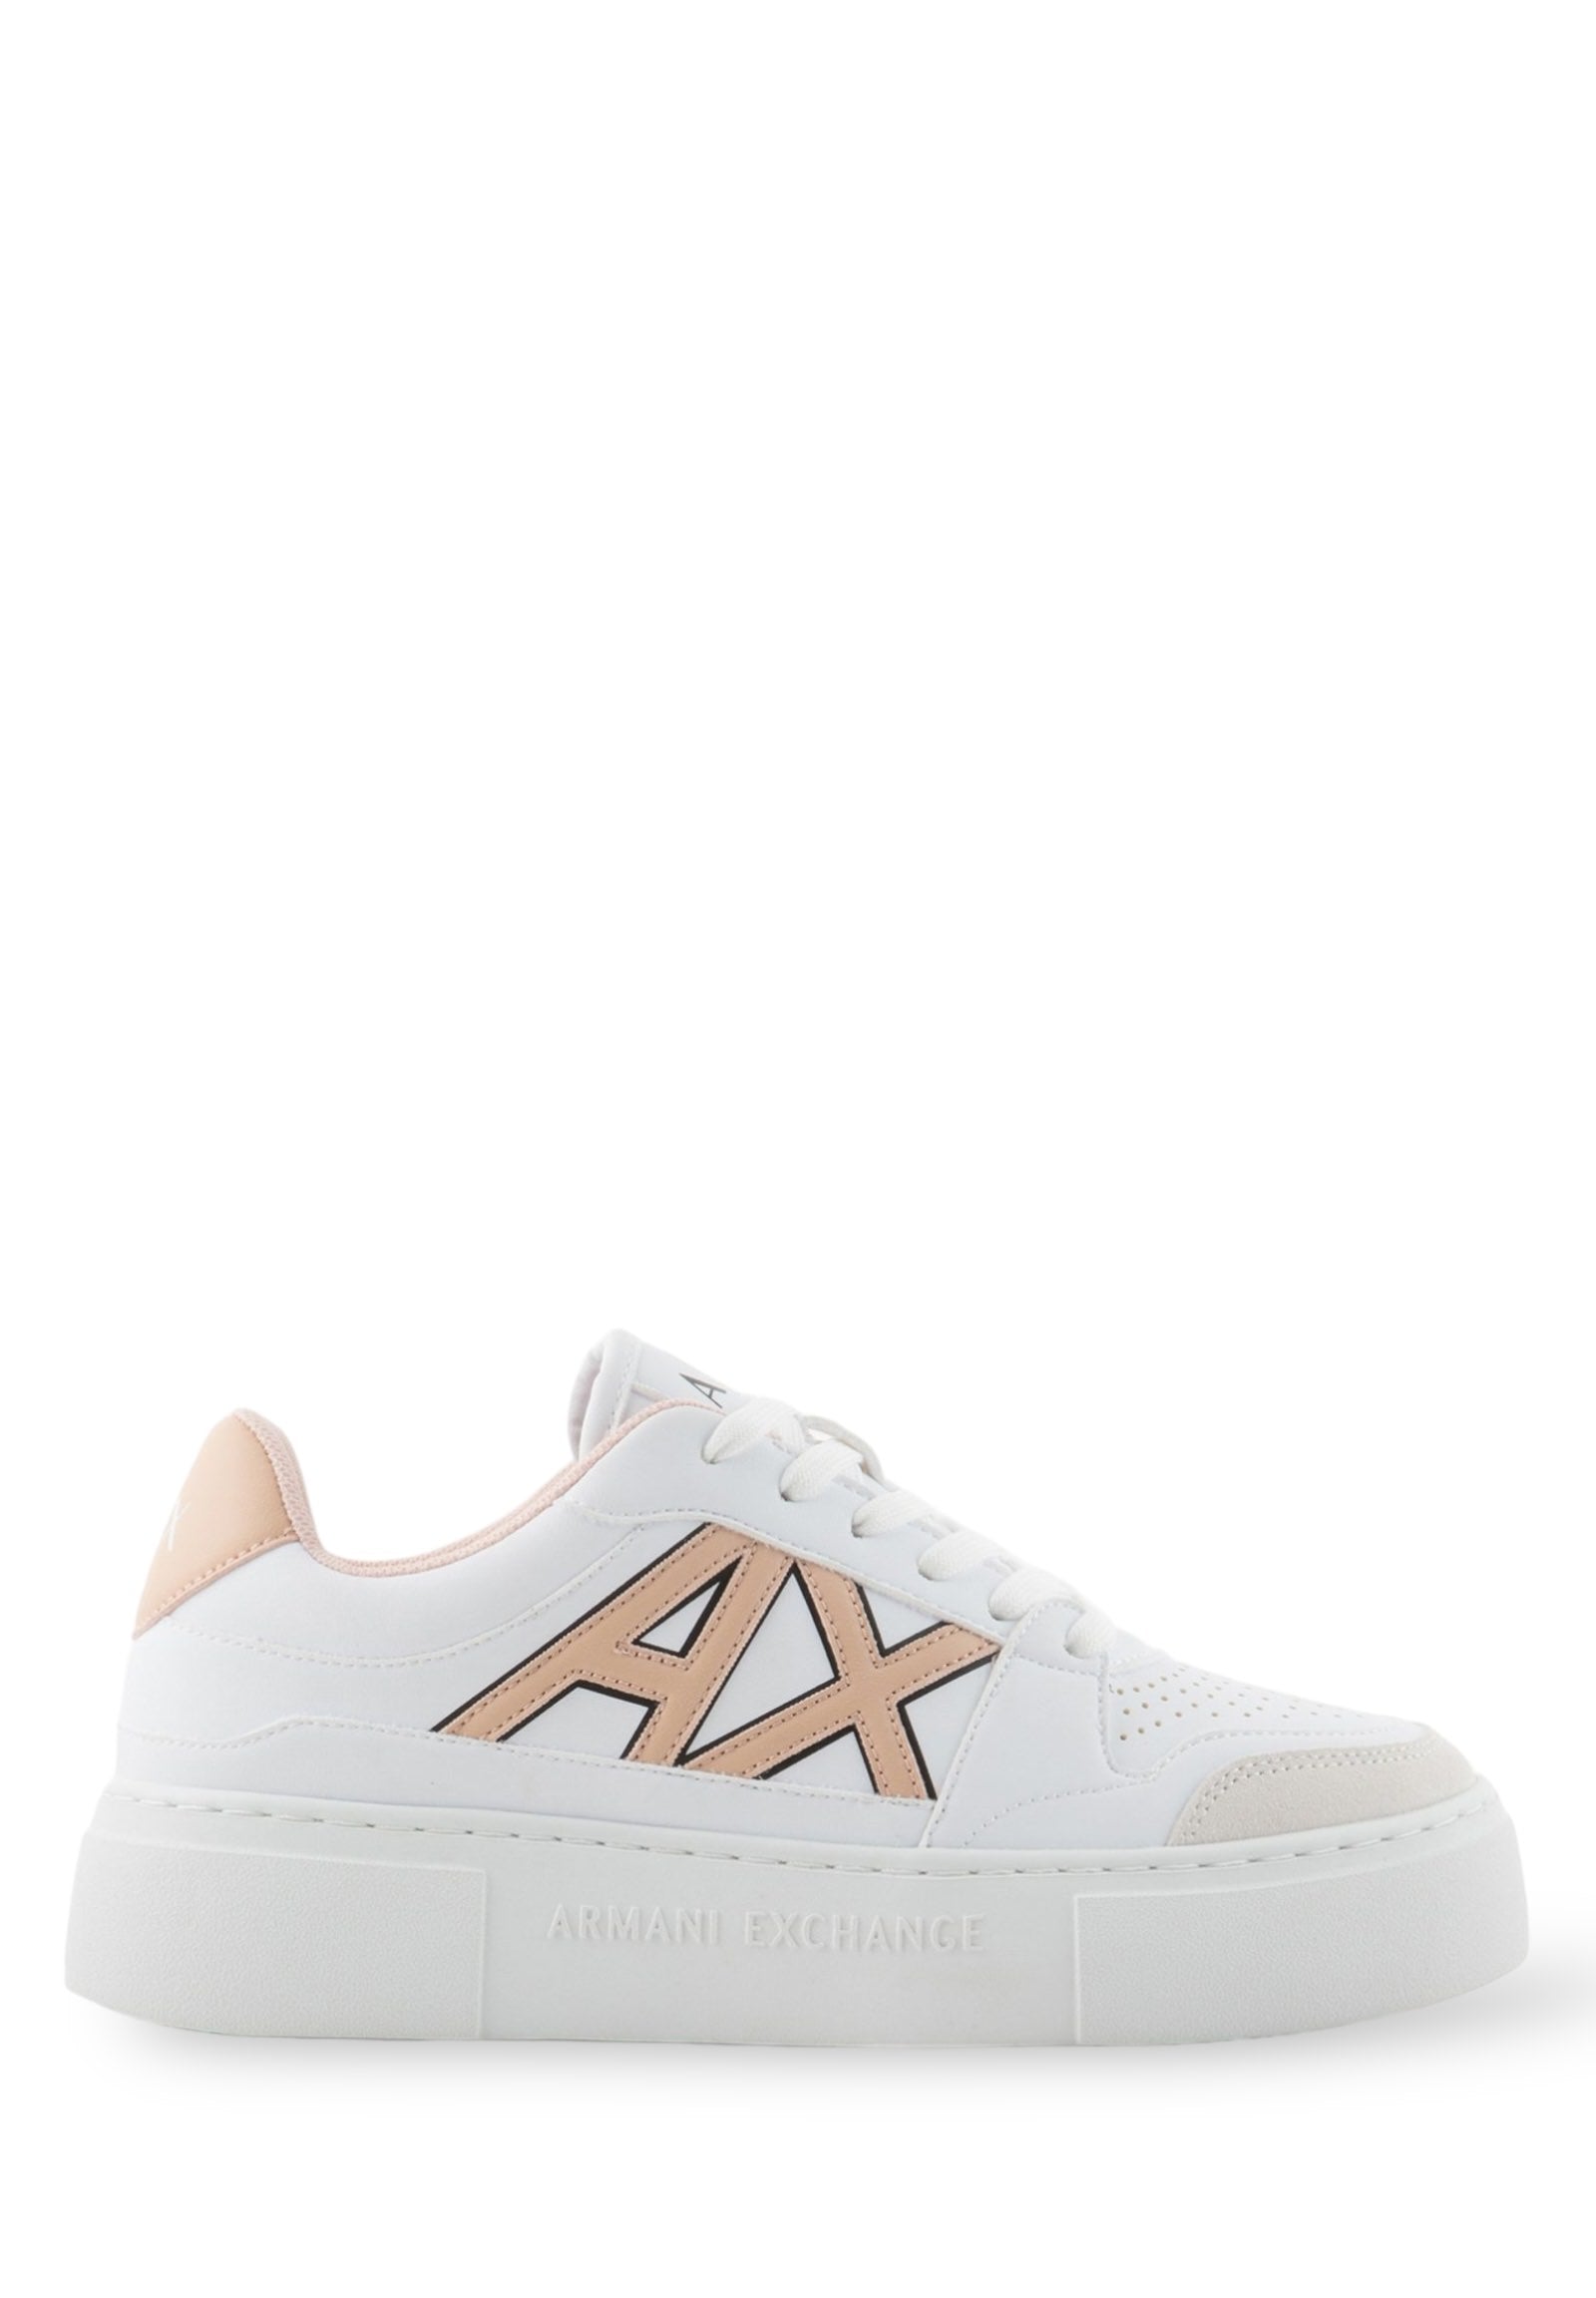 Sneakers Xdx147 Optic WhitE-Rose